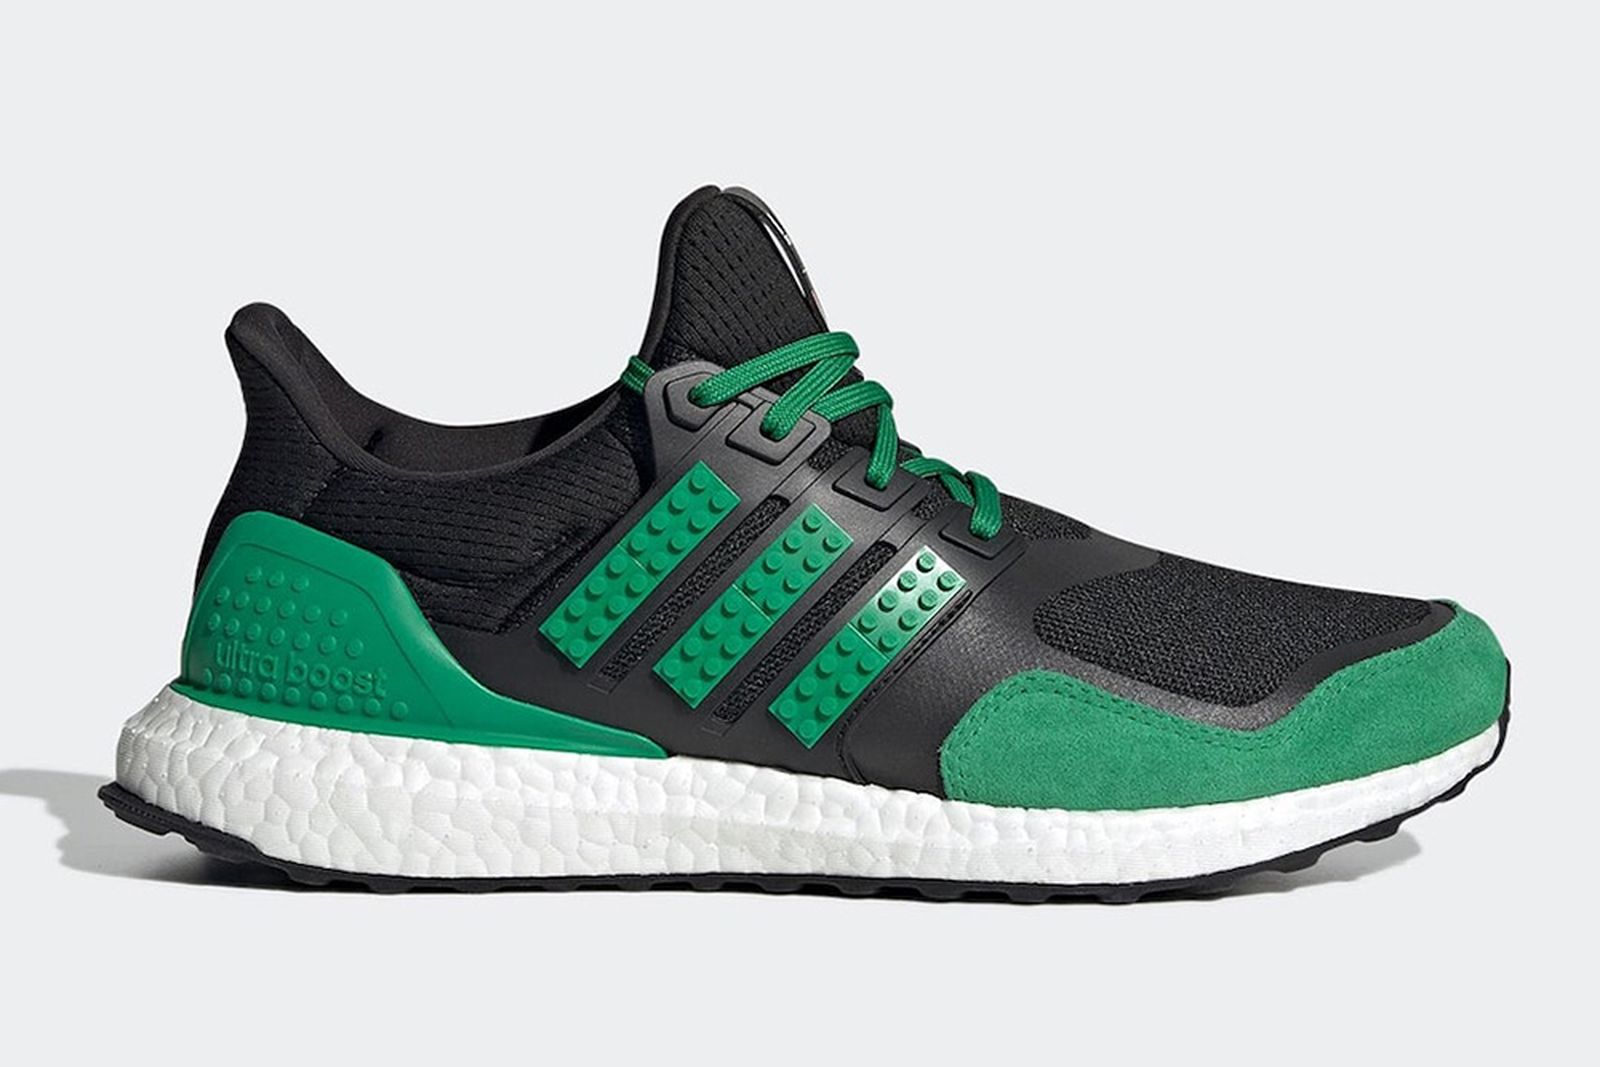 lego-adidas-ultraboost-color-pack-release-date-price-13